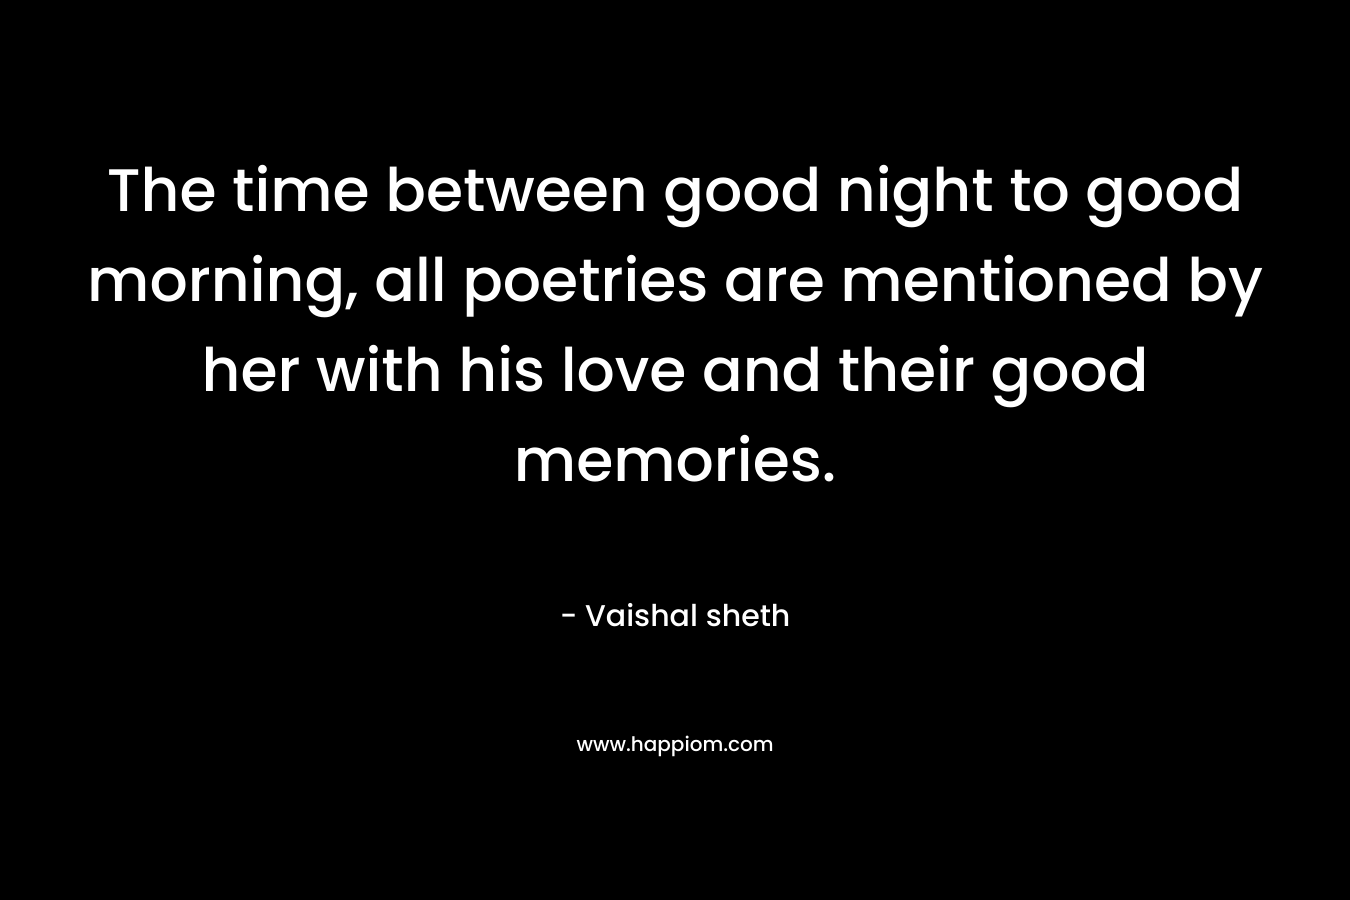 The time between good night to good morning, all poetries are mentioned by her with his love and their good memories.